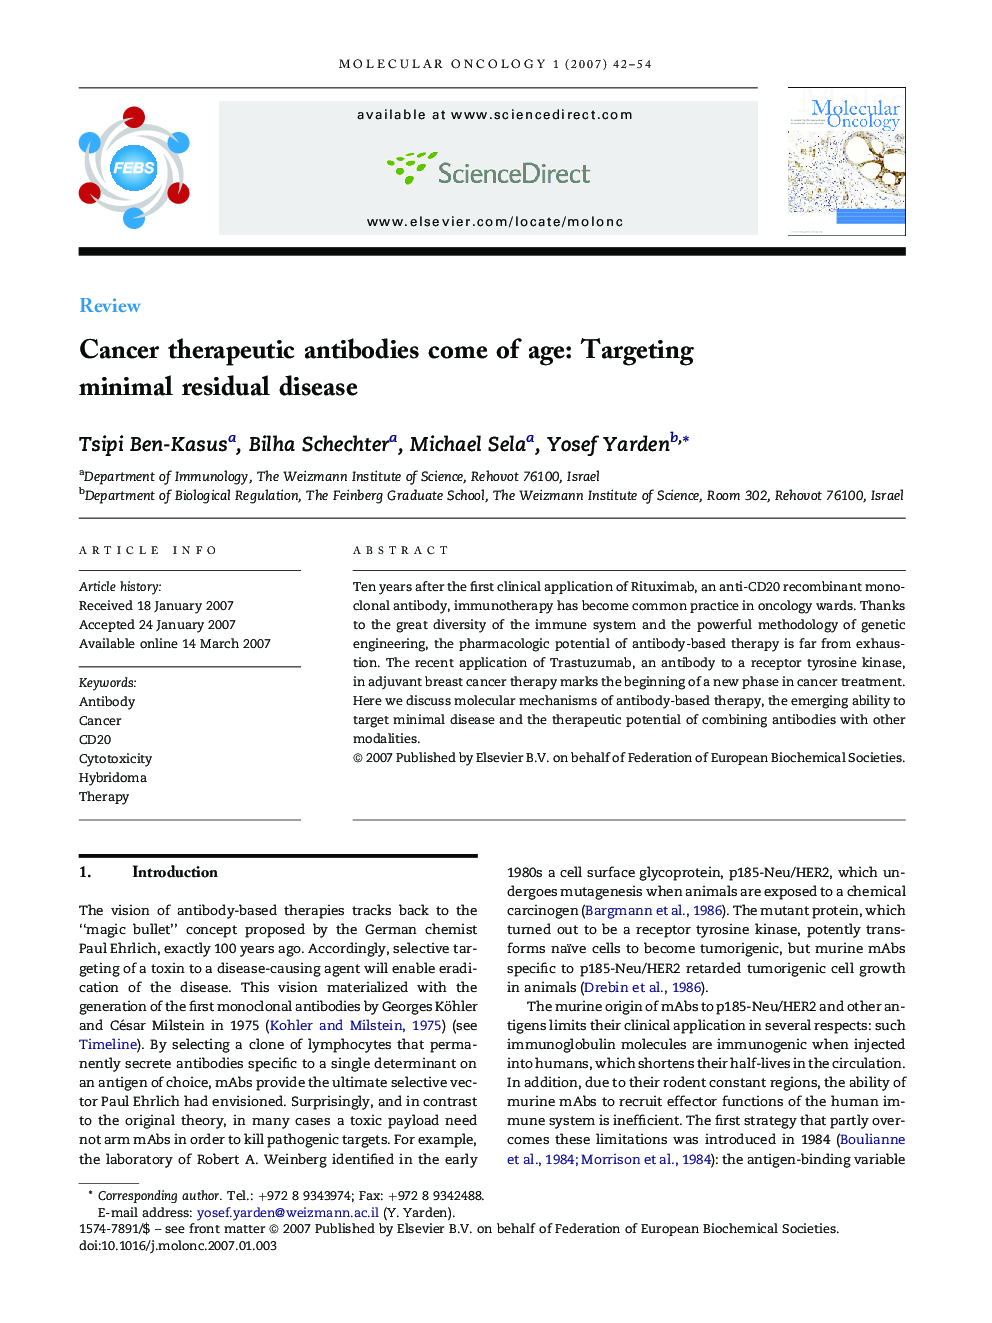 Cancer therapeutic antibodies come of age: Targeting minimal residual disease